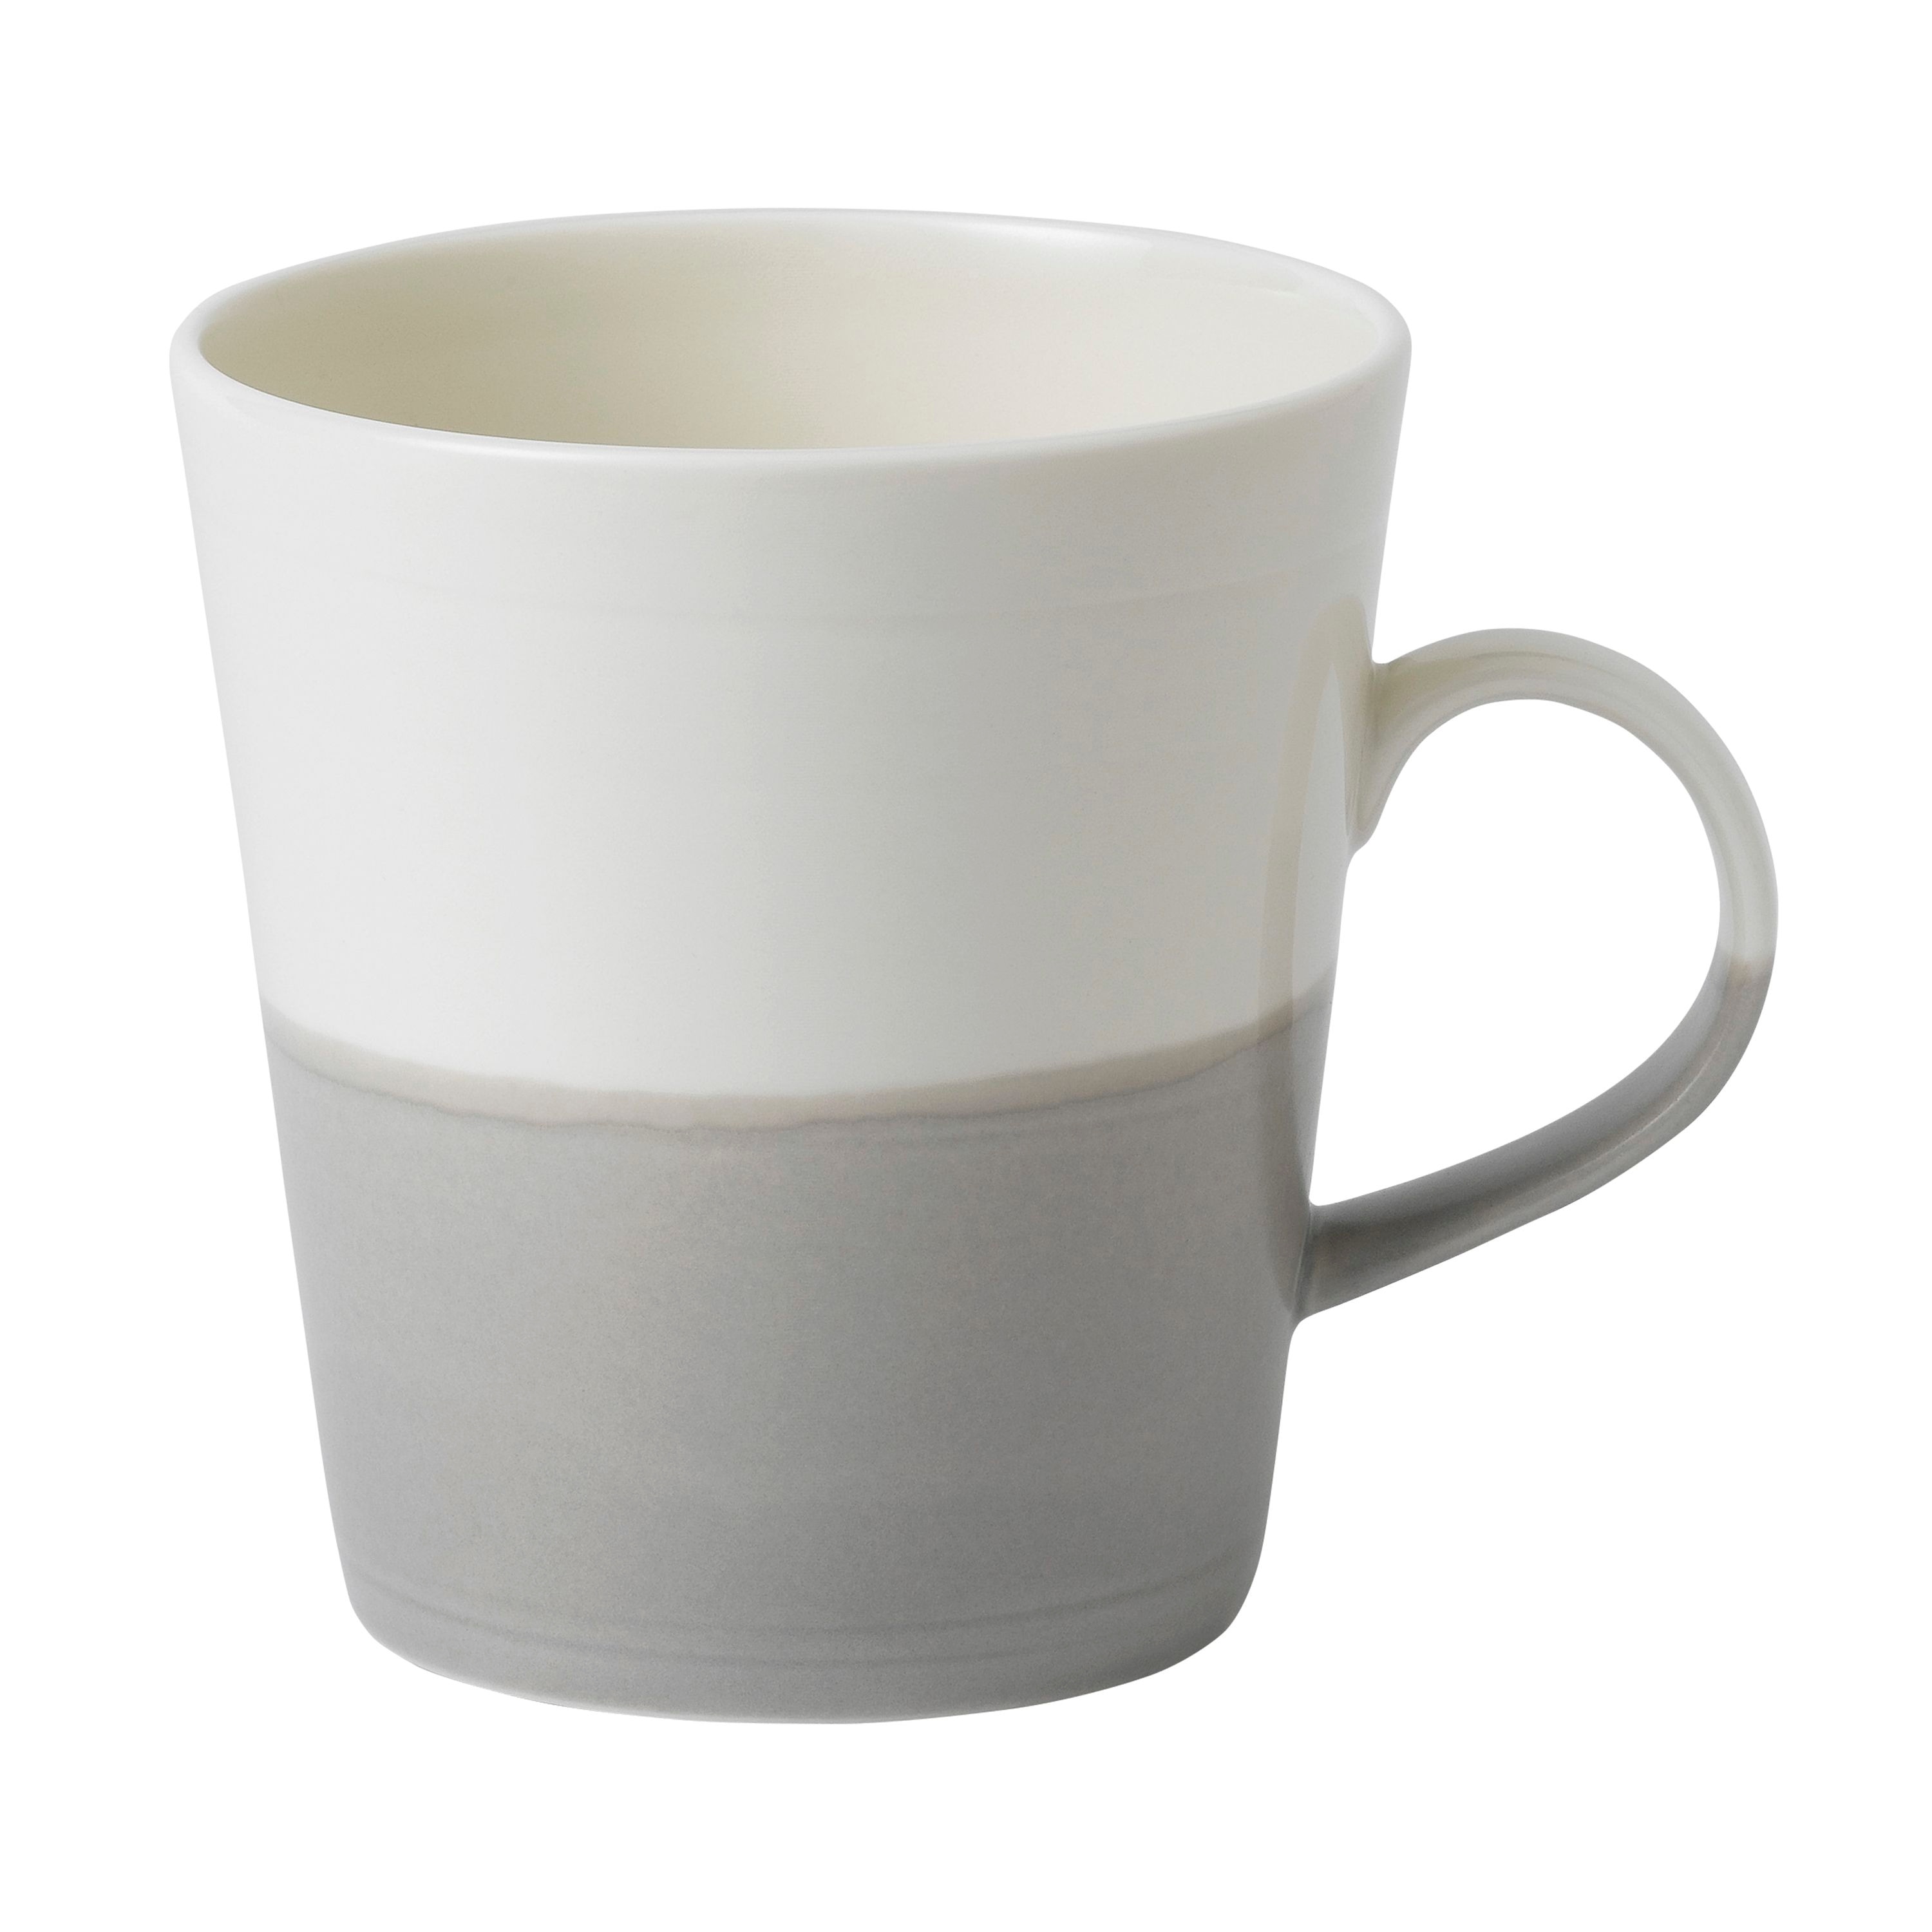 https://ak1.ostkcdn.com/images/products/is/images/direct/d0f29023c142970173fb88811bc6e197b9bd6b7f/Coffee-Studio-Mug-Grande-19-Oz-Set-4-Mixed-Colors.jpg